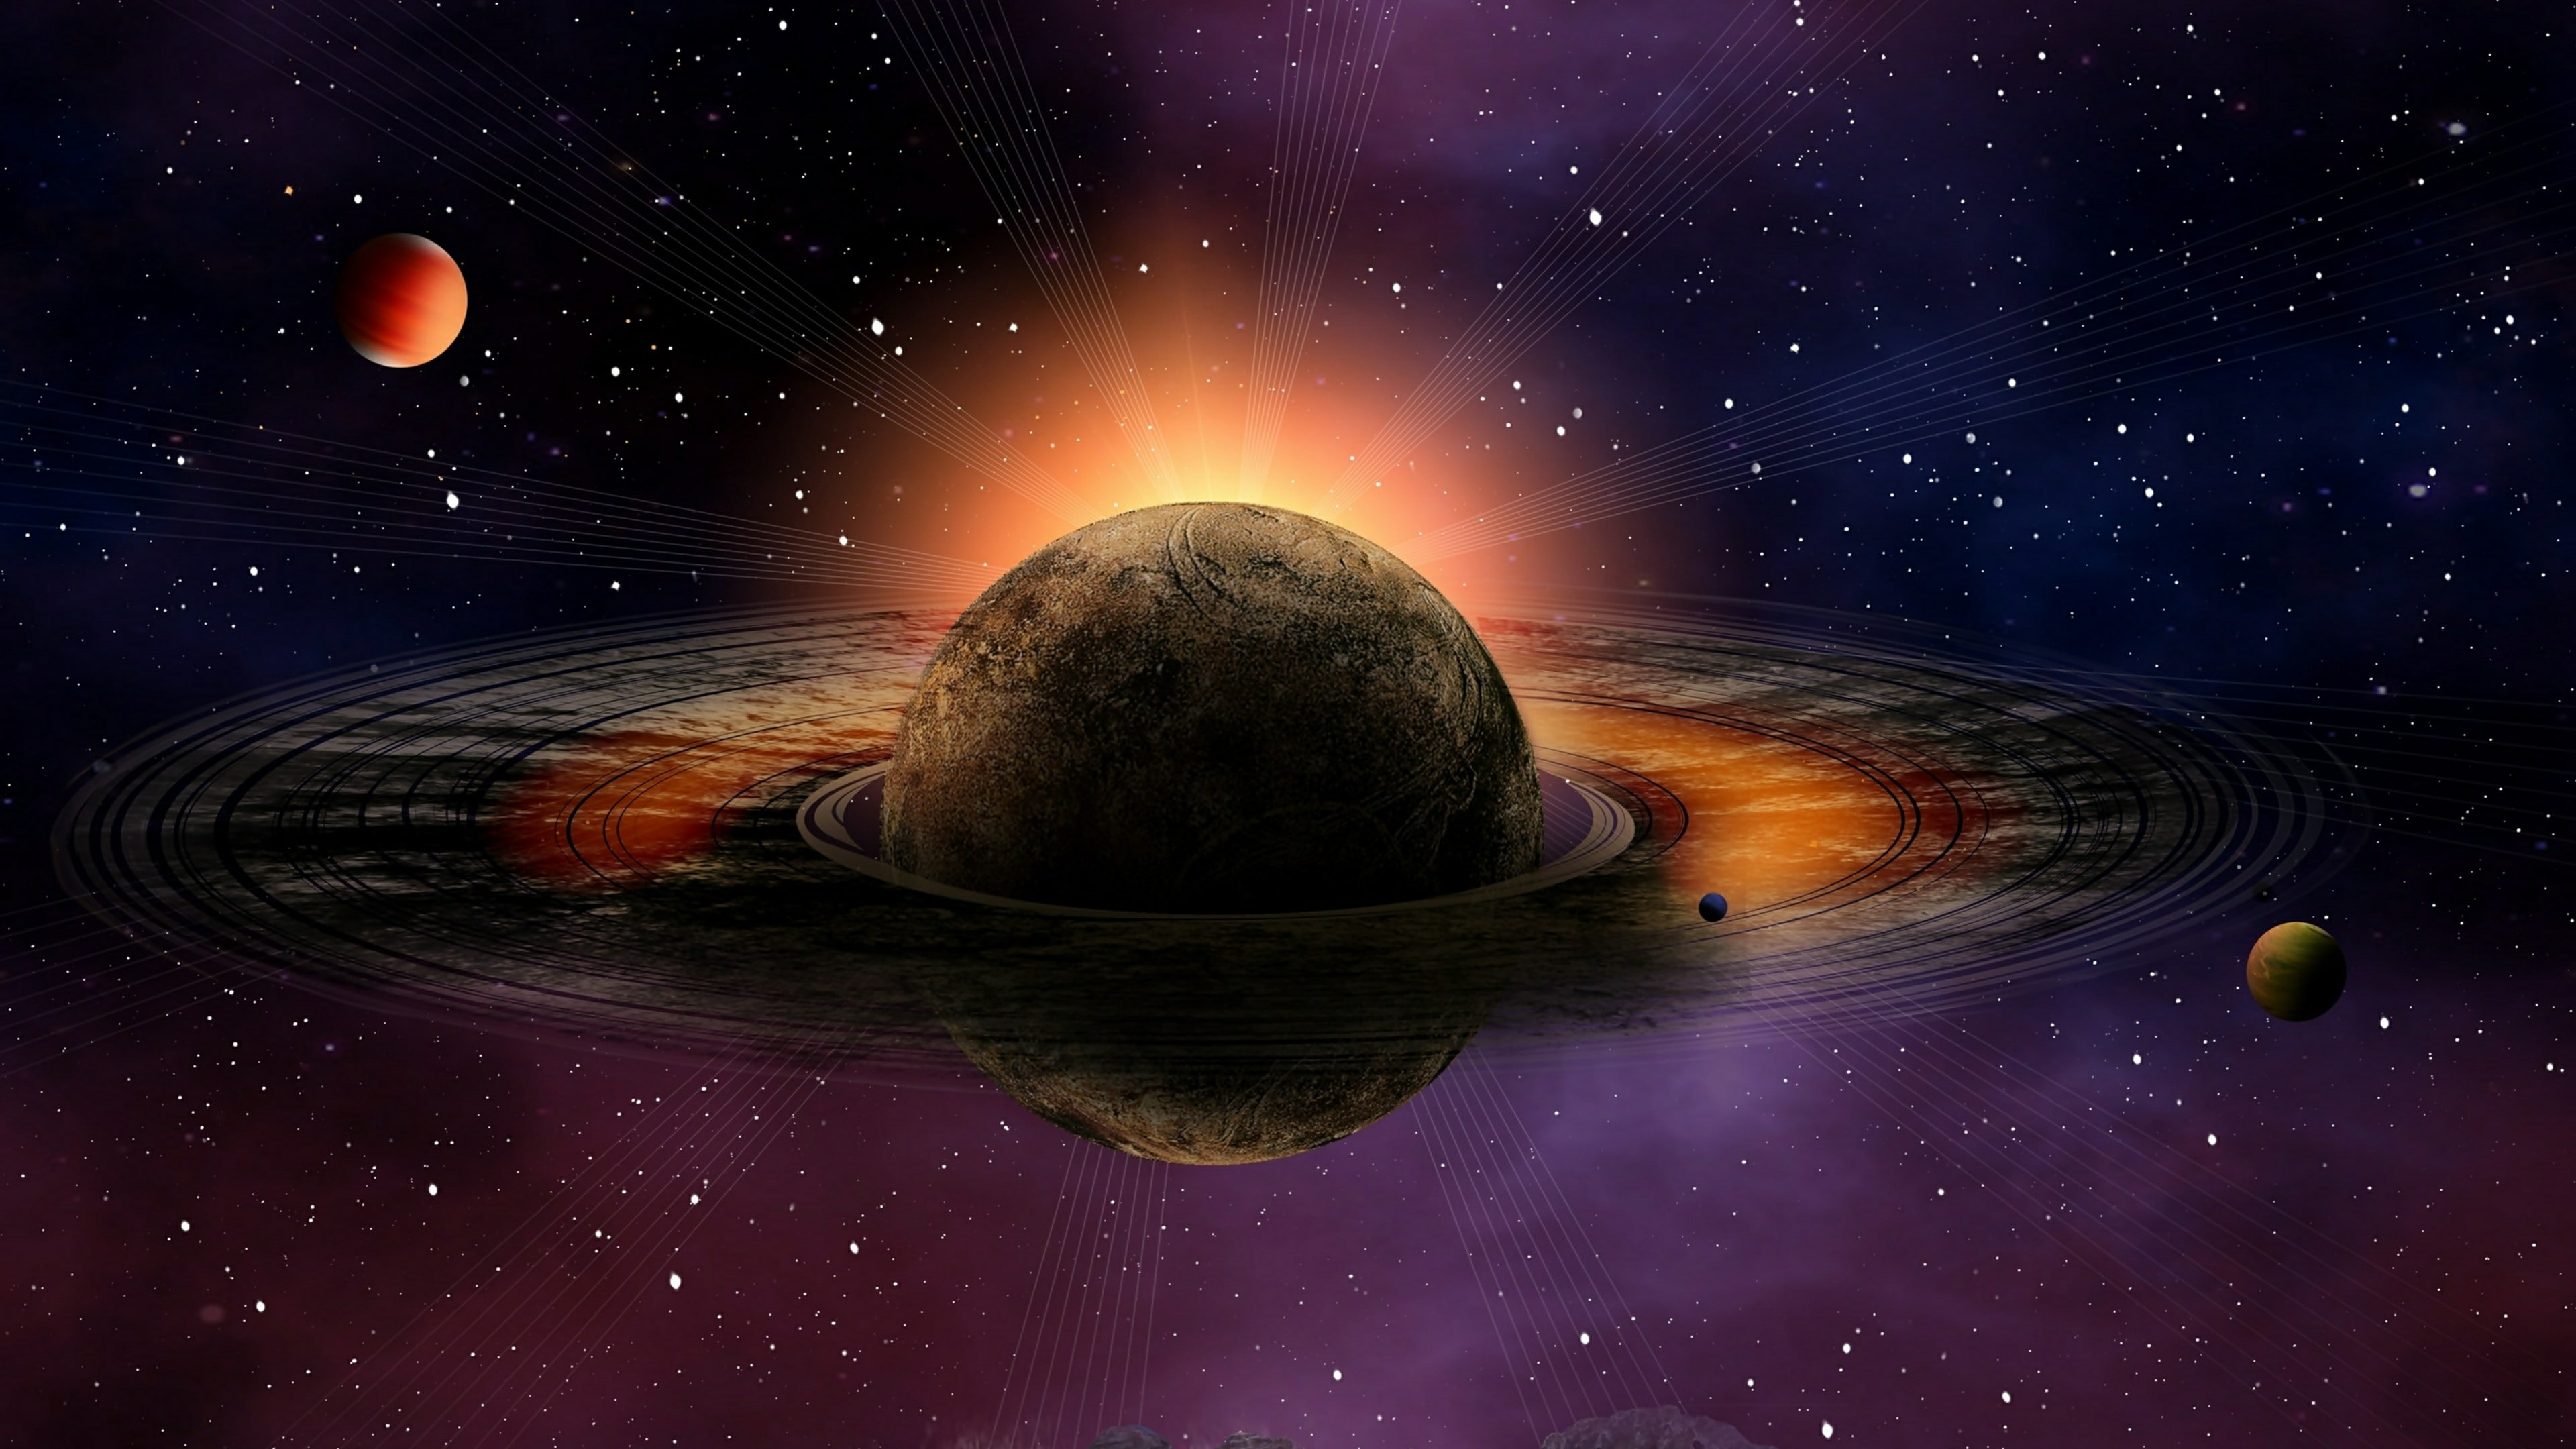 3d, planetary ring, ringed planet, space art, moons, universe